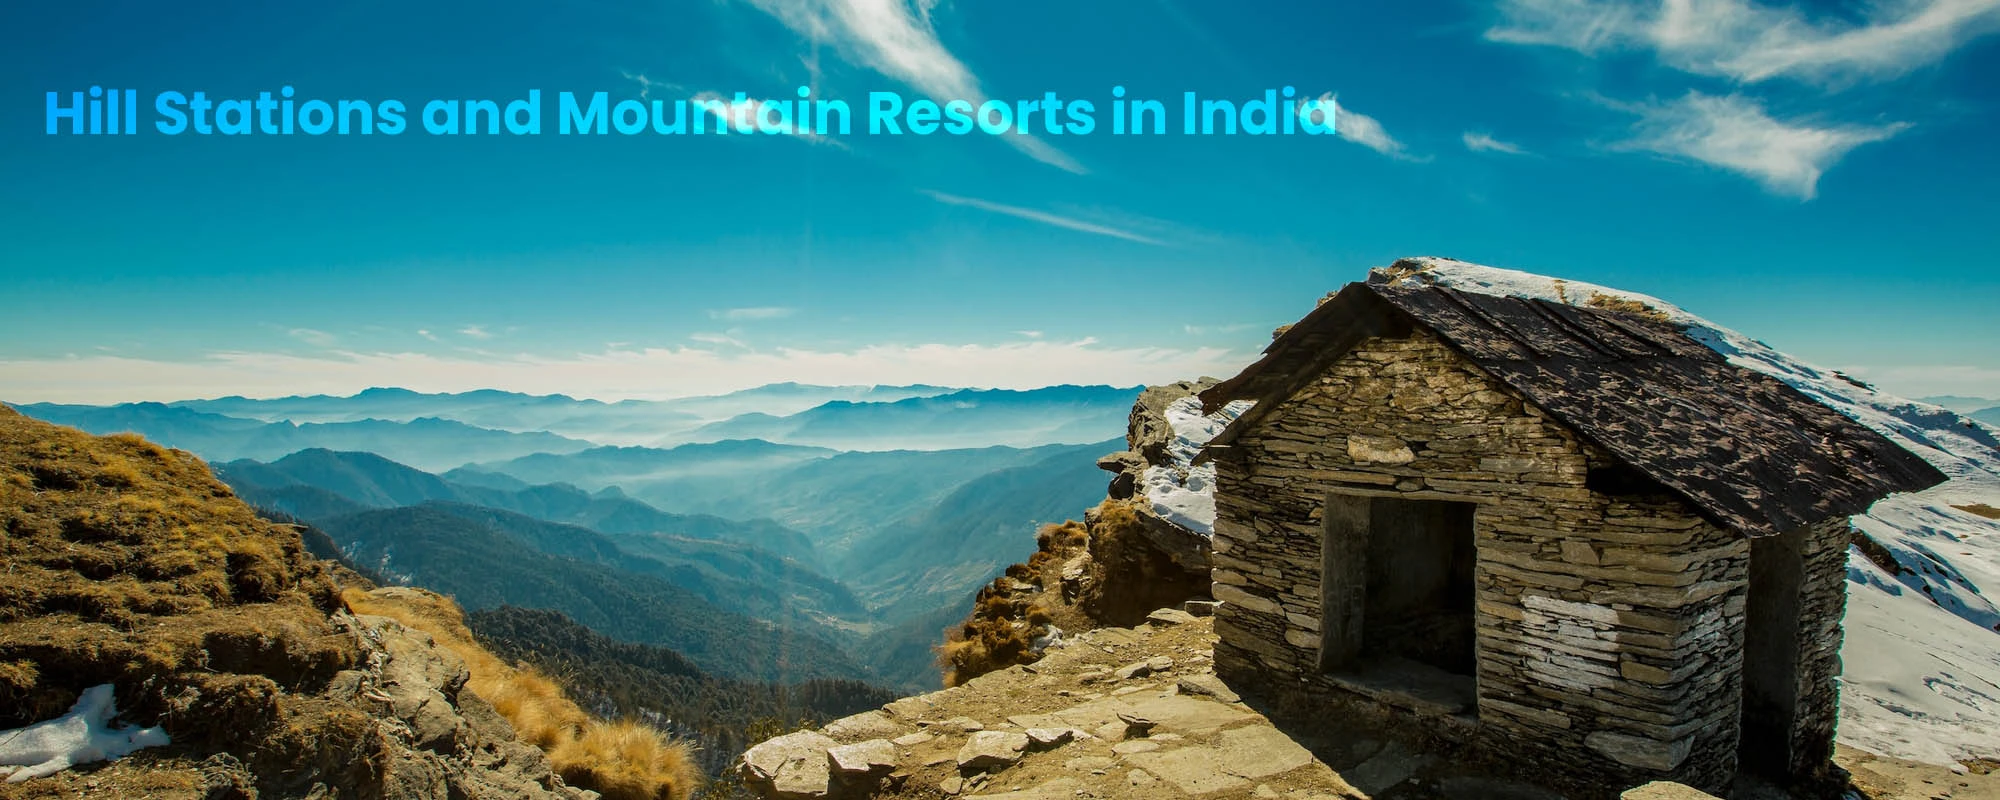 Hill Stations and Mountain Resorts in India